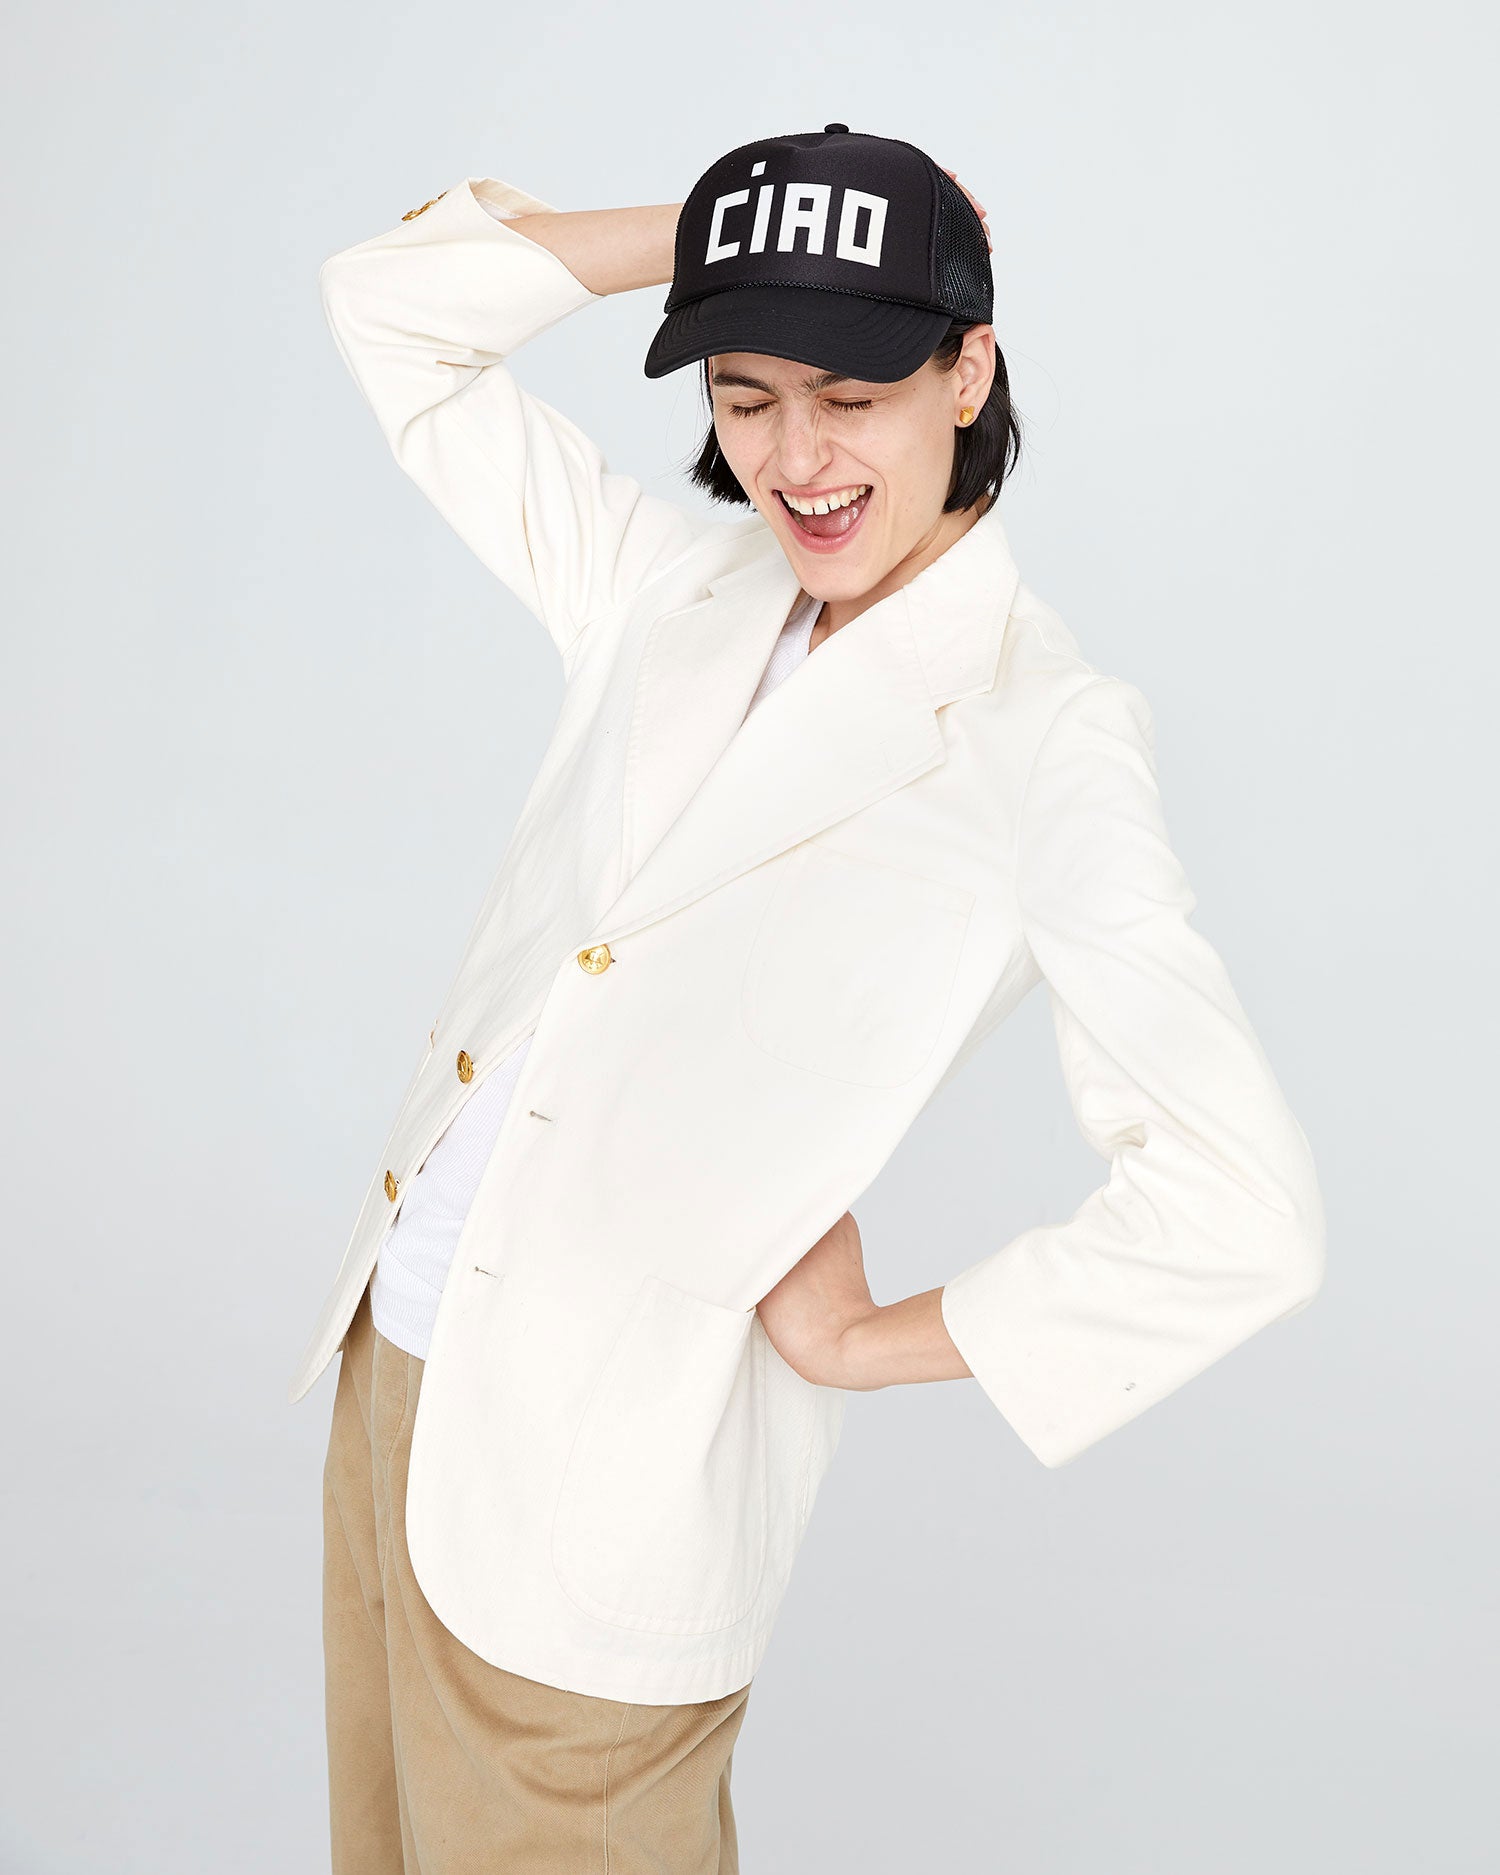 Clare V. Trucker Hat - Block Ciao - Green - Bliss Boutiques